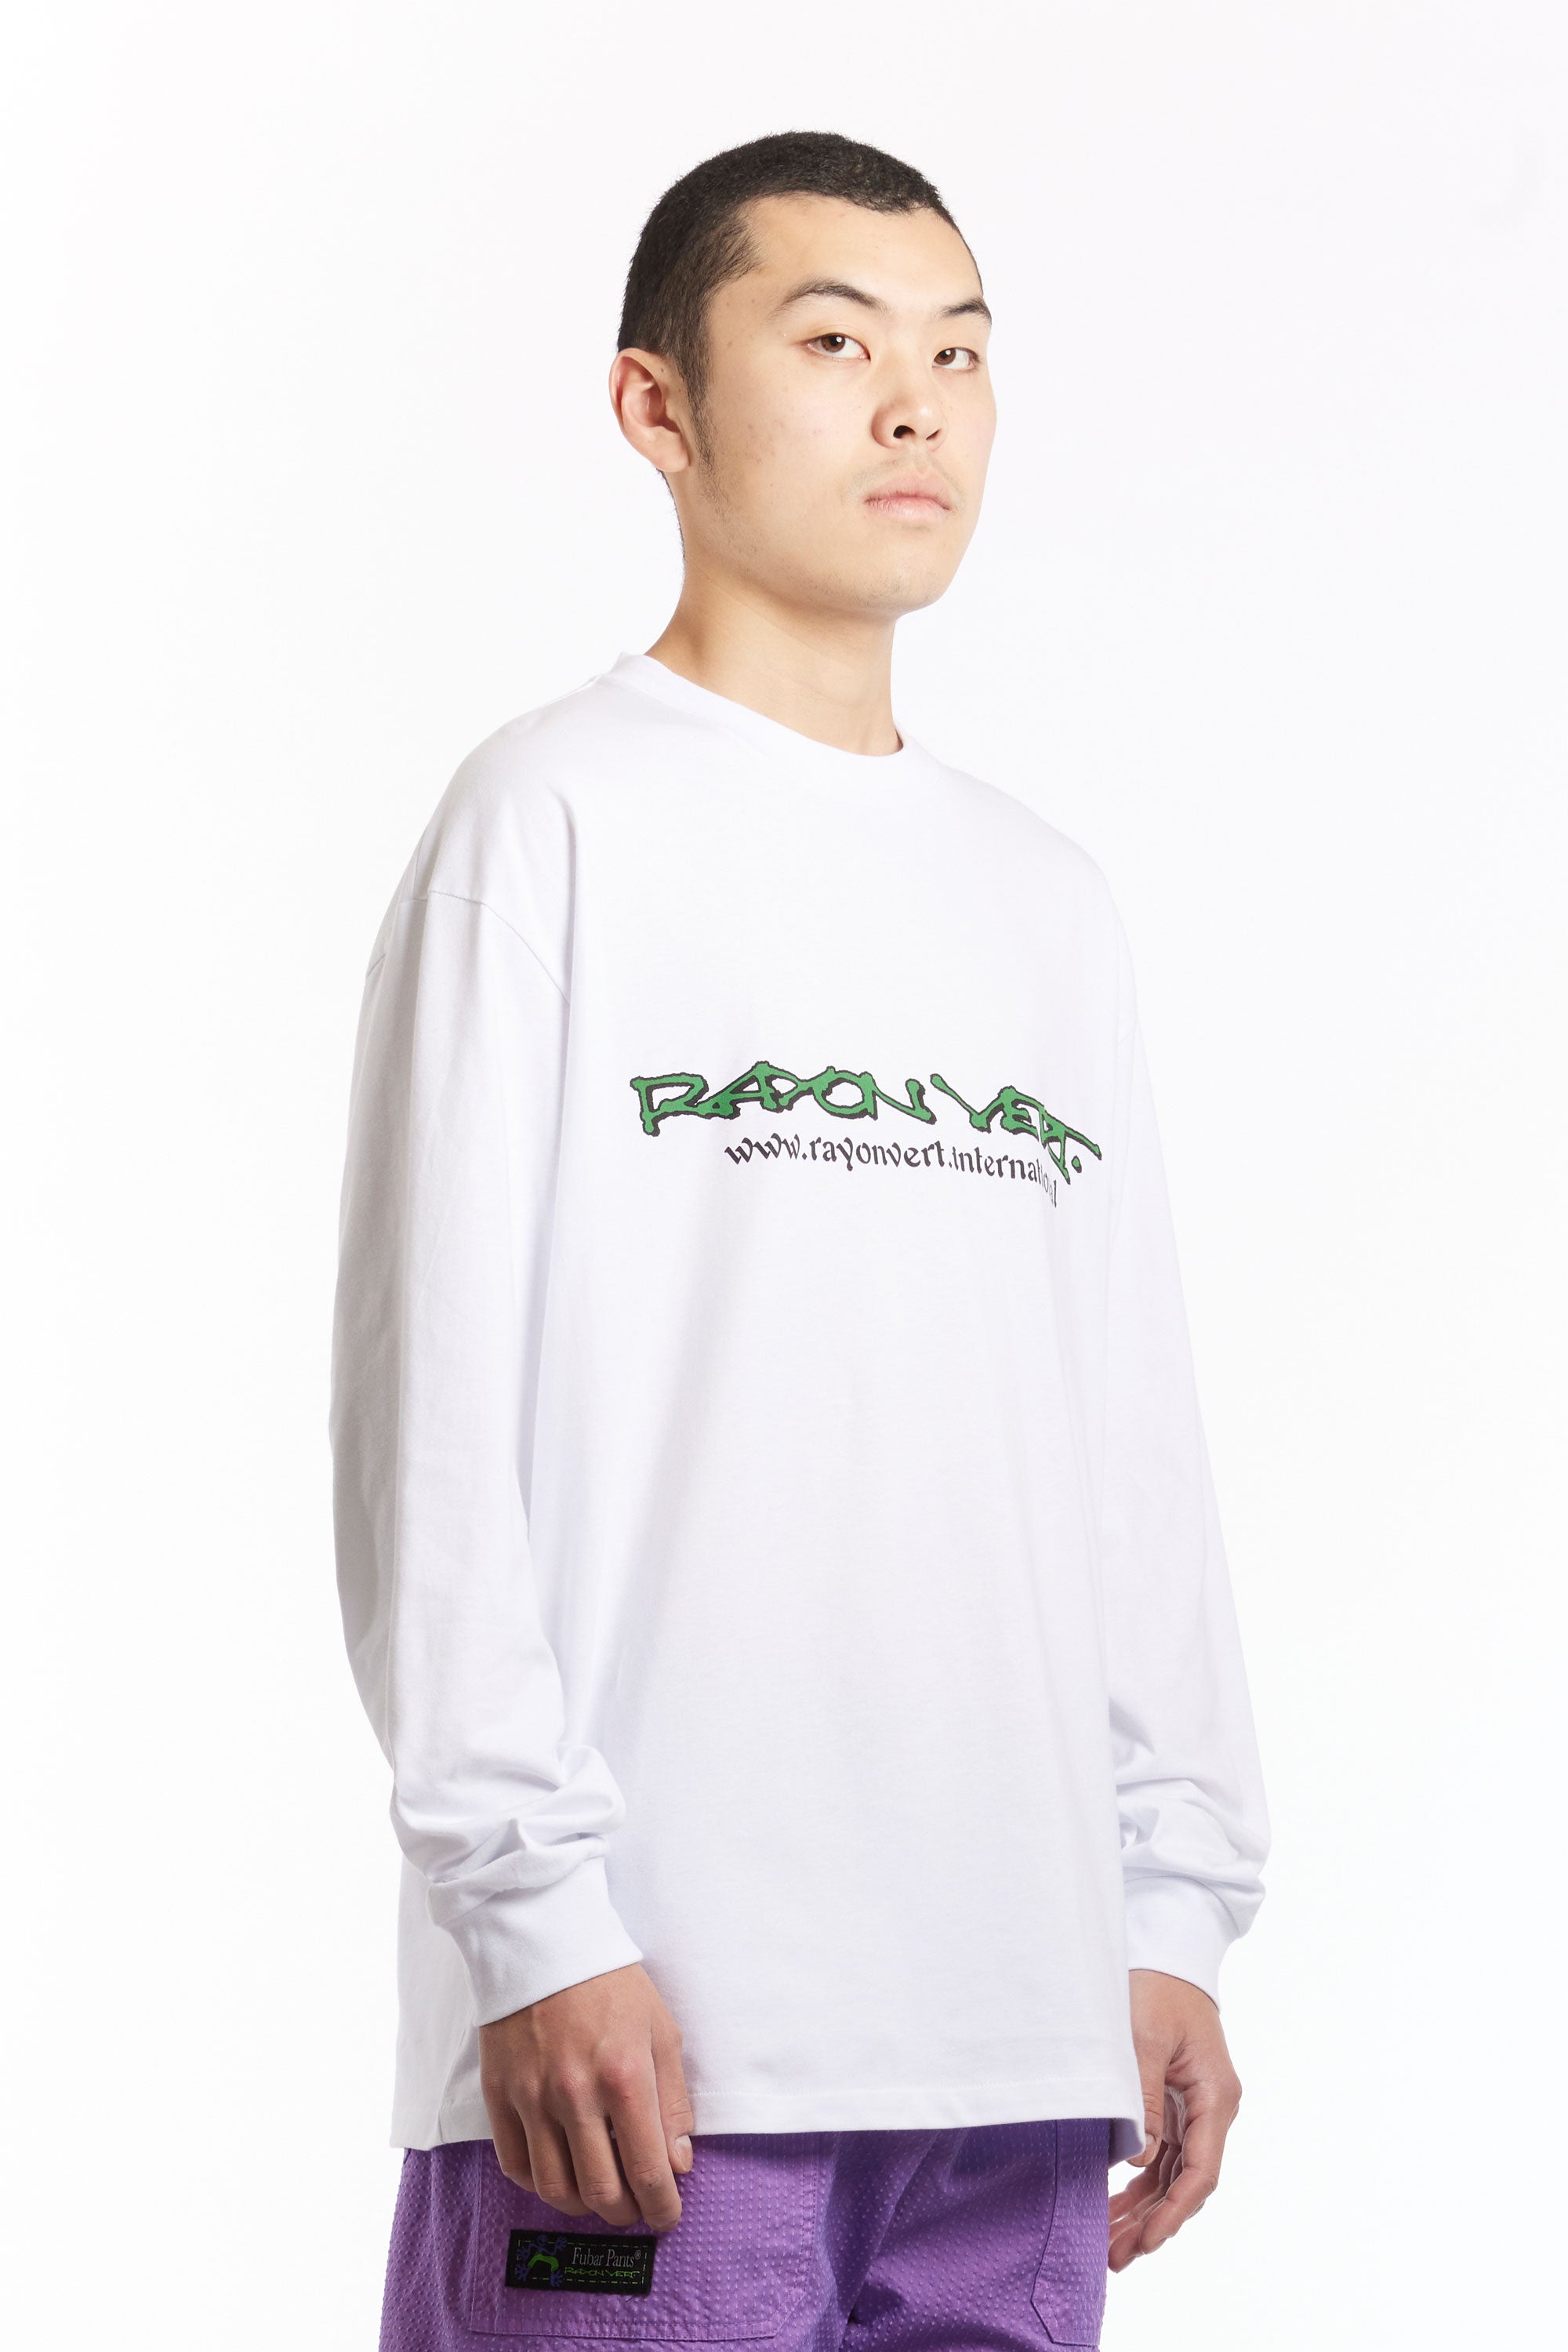 The RAYON VERT - LUCKY LONGSLEEVE T-SHIRT  available online with global shipping, and in PAM Stores Melbourne and Sydney.